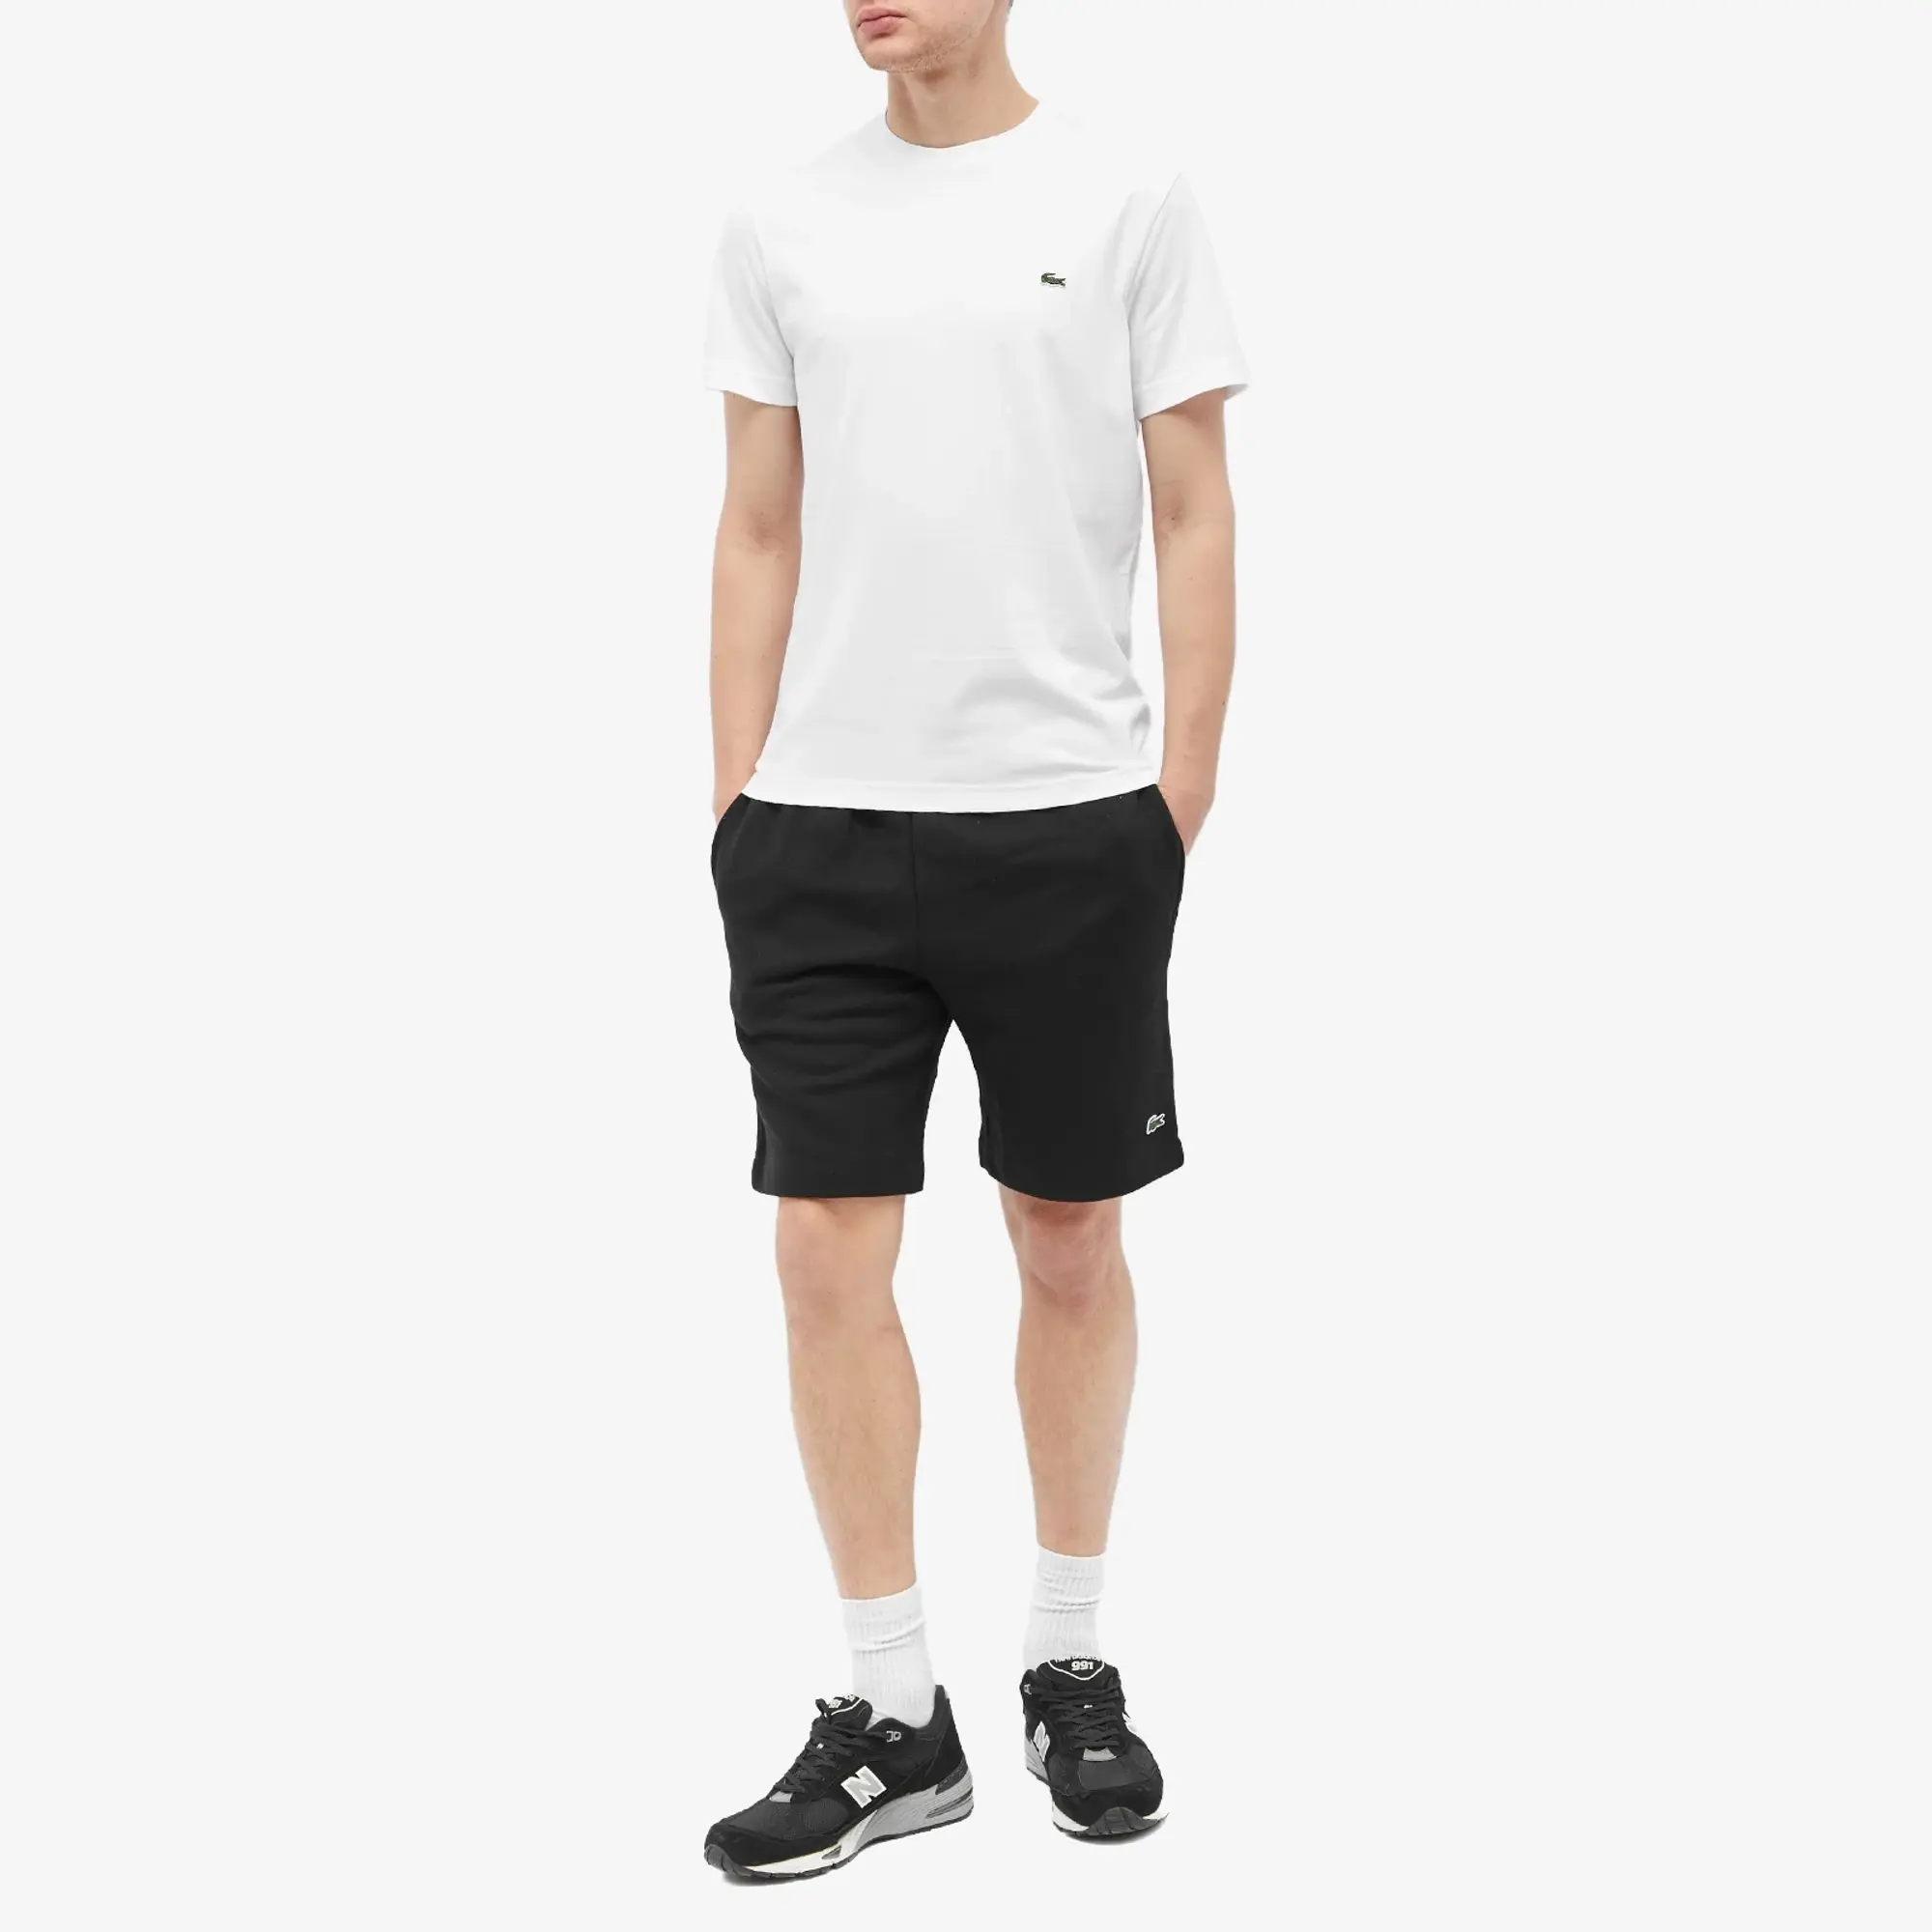 Lacoste Logo T-Shirt In White